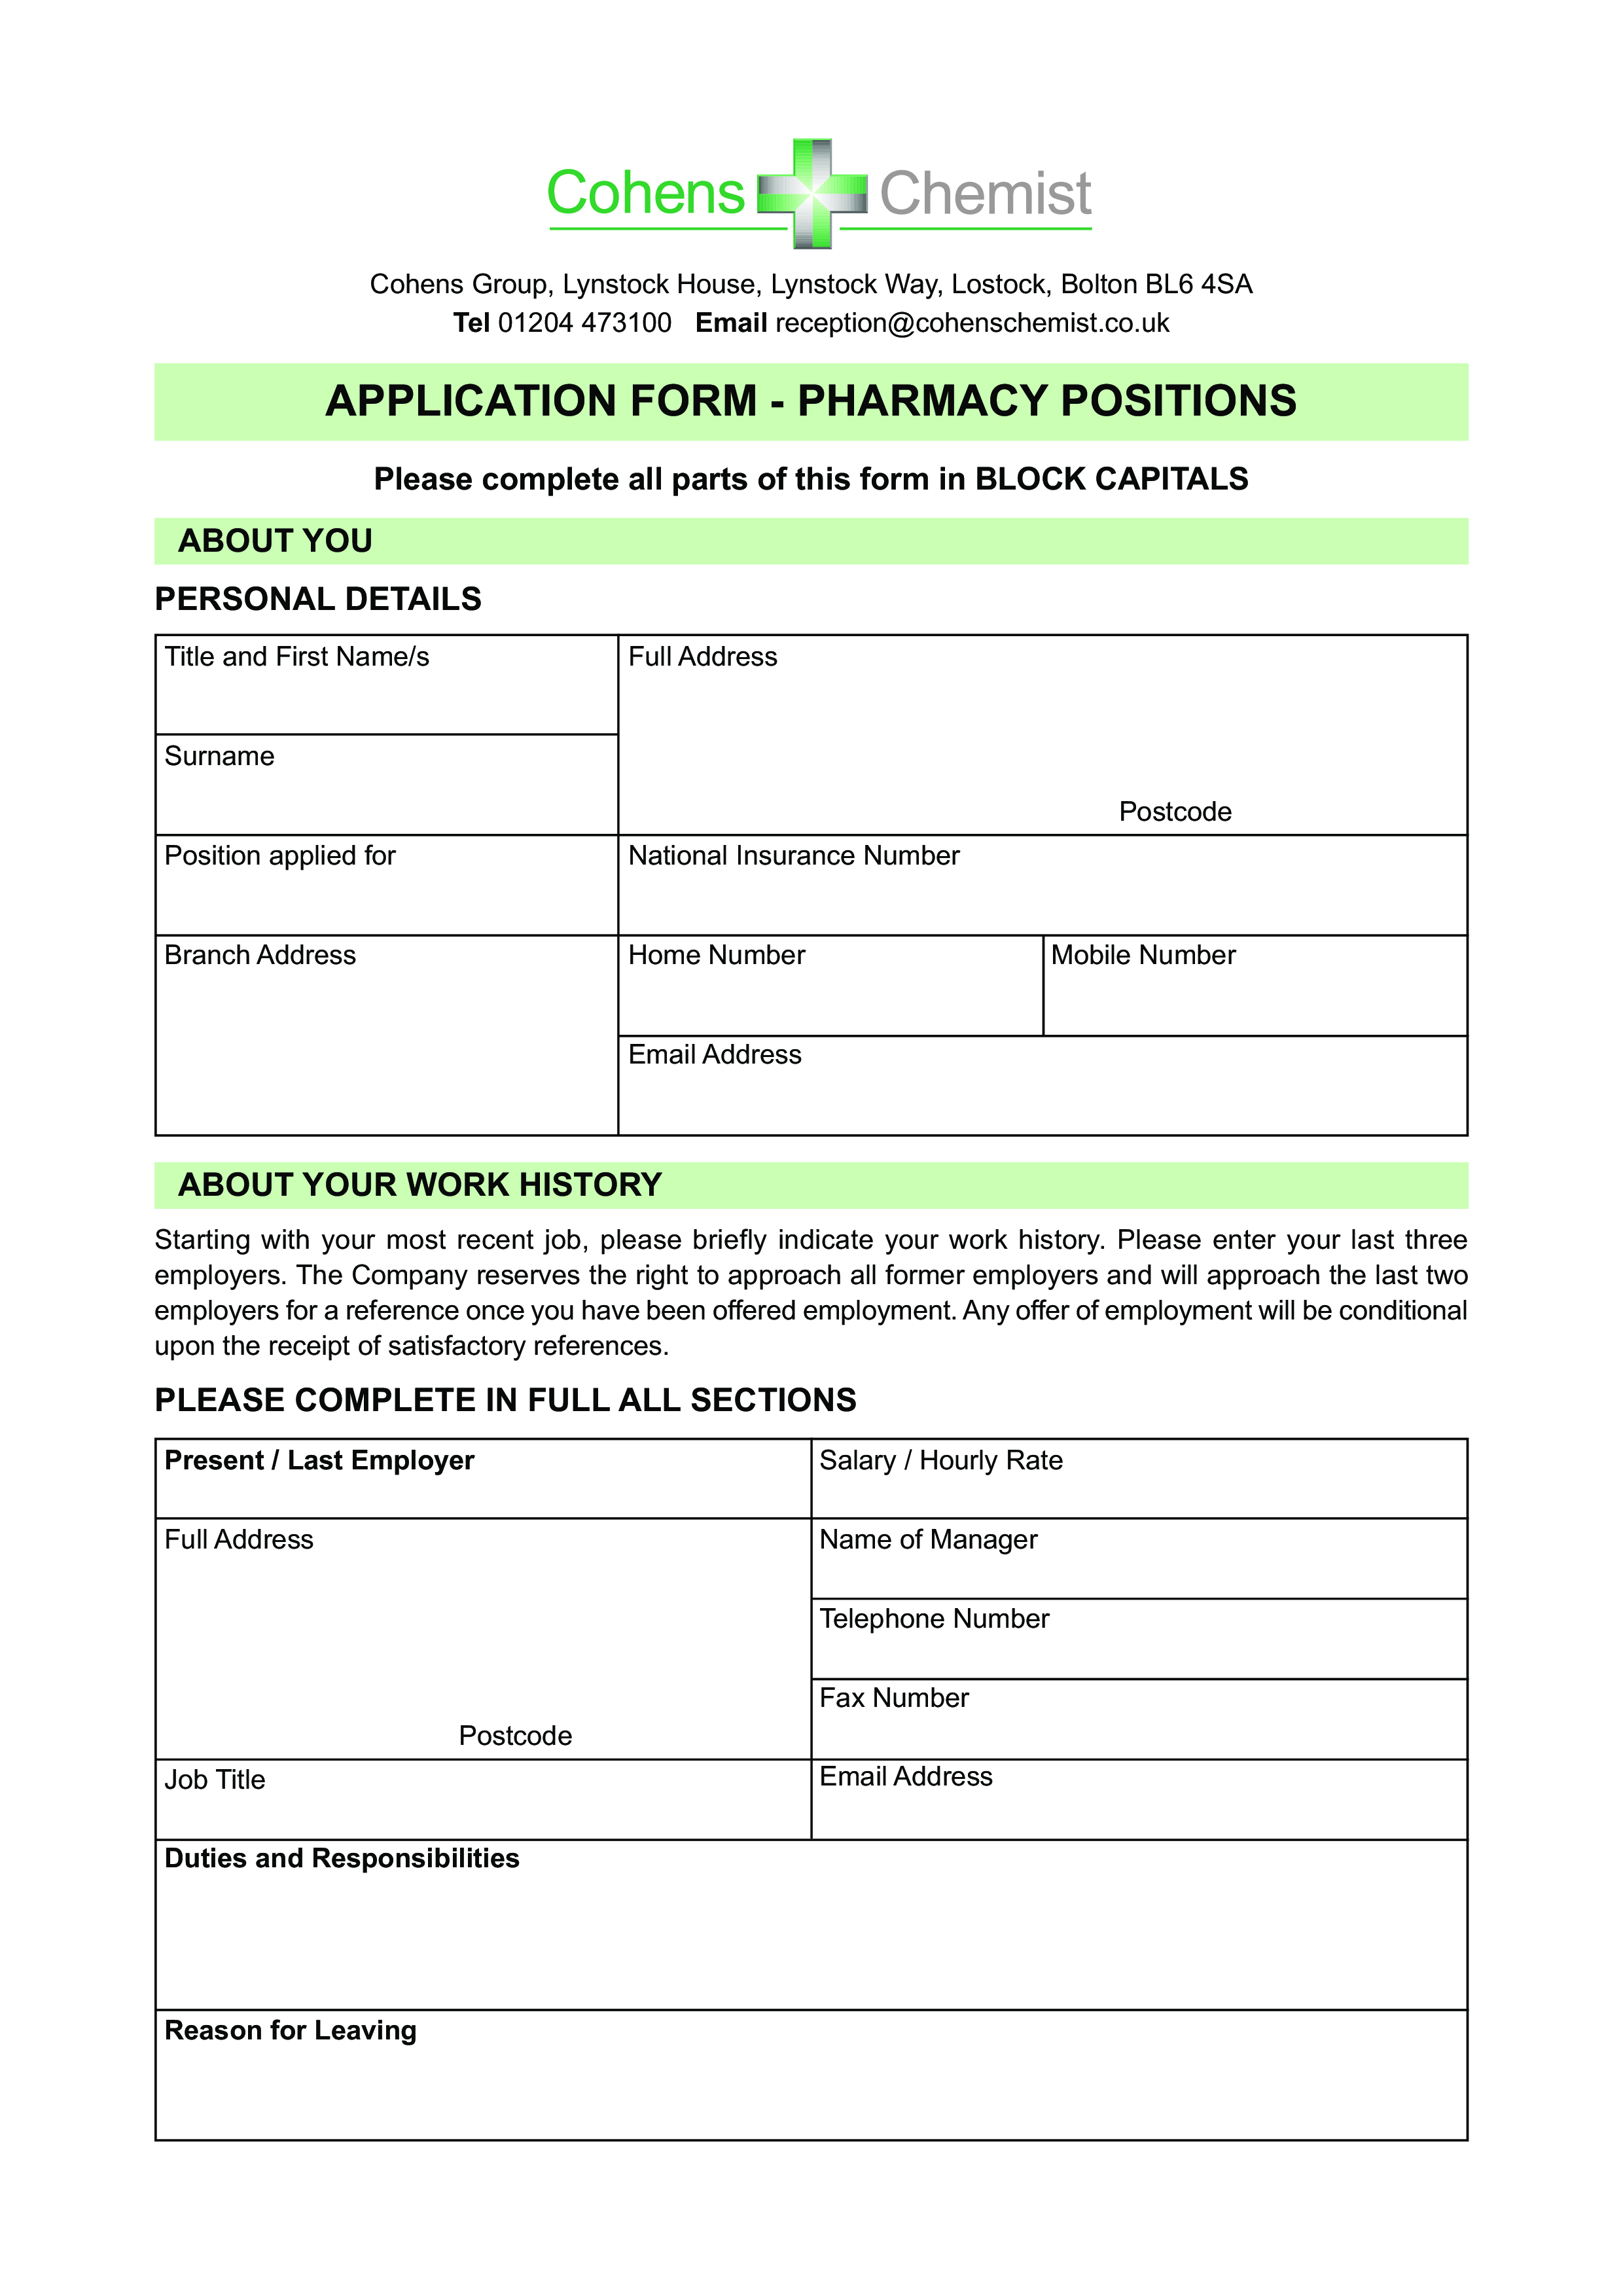 Application Form Pharmacy Positions main image